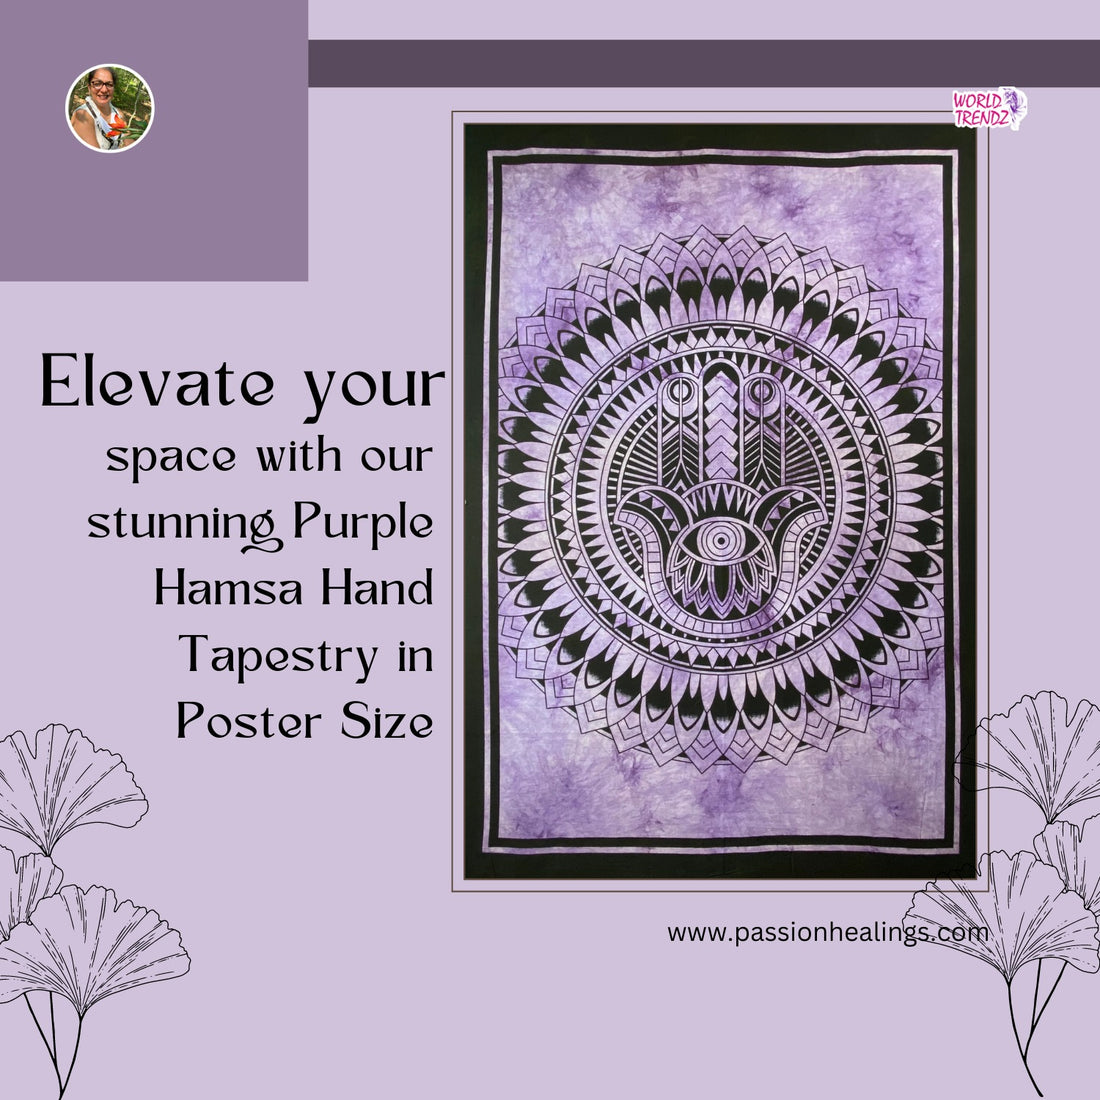 Step into the world of enchantment with the Purple Hamsa Hand Tapestry-Poster Size